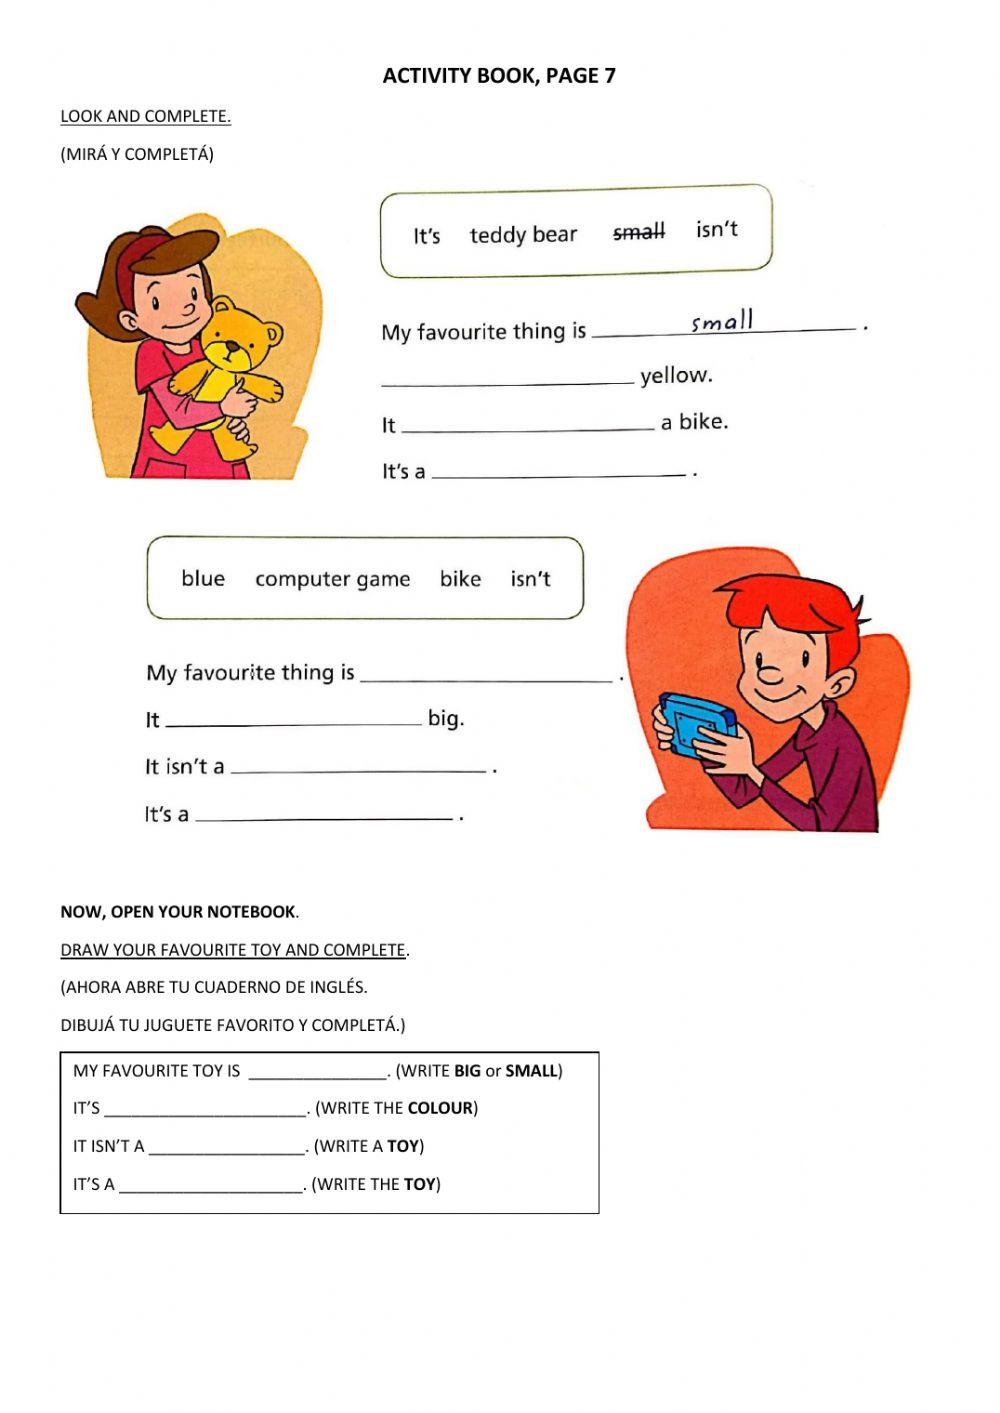 New English Adventure Level 1 ACTIVITY BOOK PAGE 7